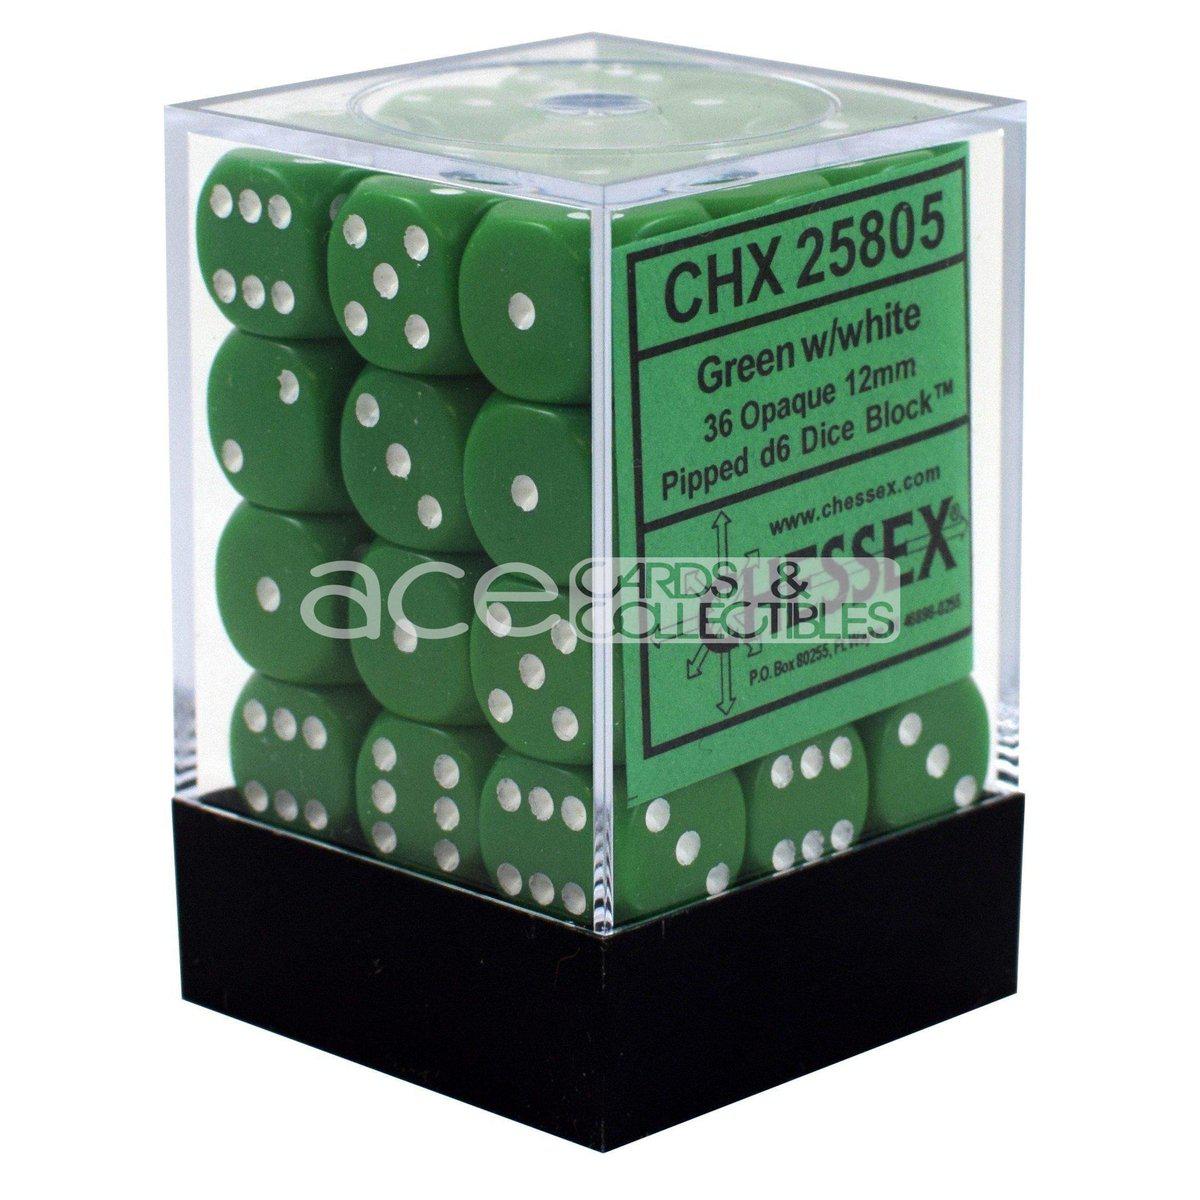 Chessex Opaque 12mm d6 36pcs Dice (Green/White) [CHX25805]-Chessex-Ace Cards & Collectibles